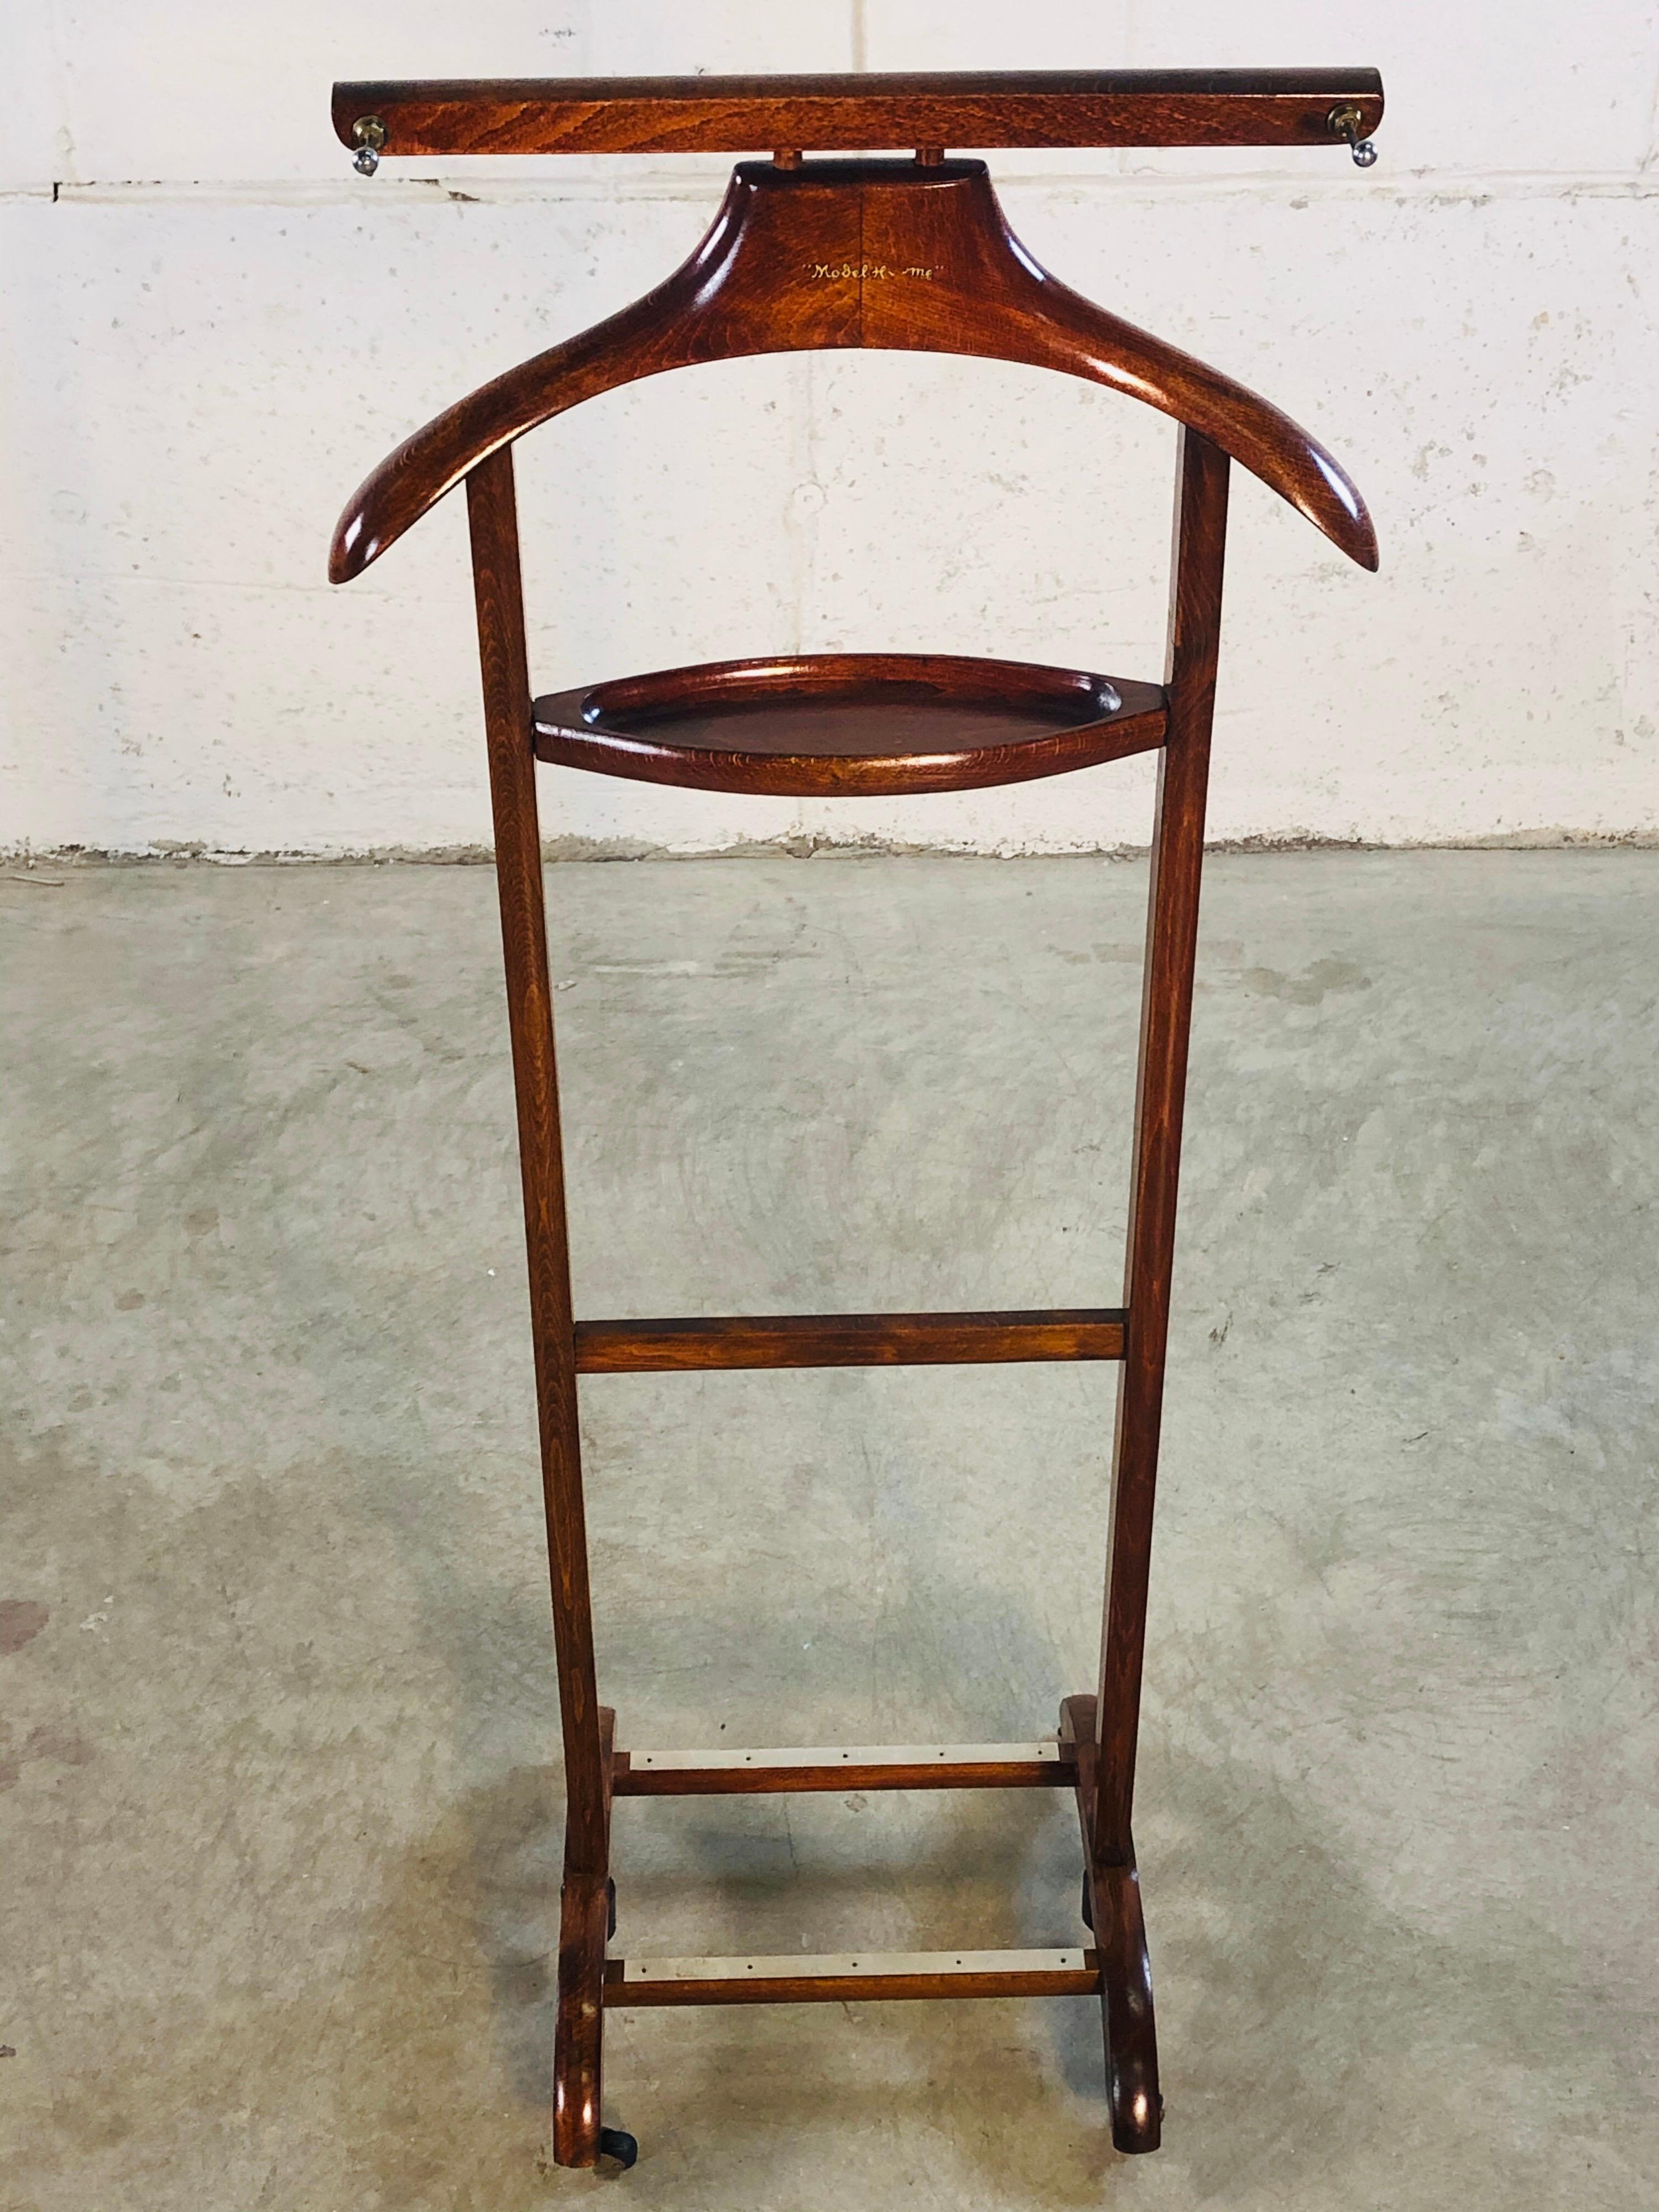 Vintage 1960s men’s bedroom valet stand on wheels. The valet is a dark maple wood with two tie hooks and a shelf for change and cufflinks. No marks.